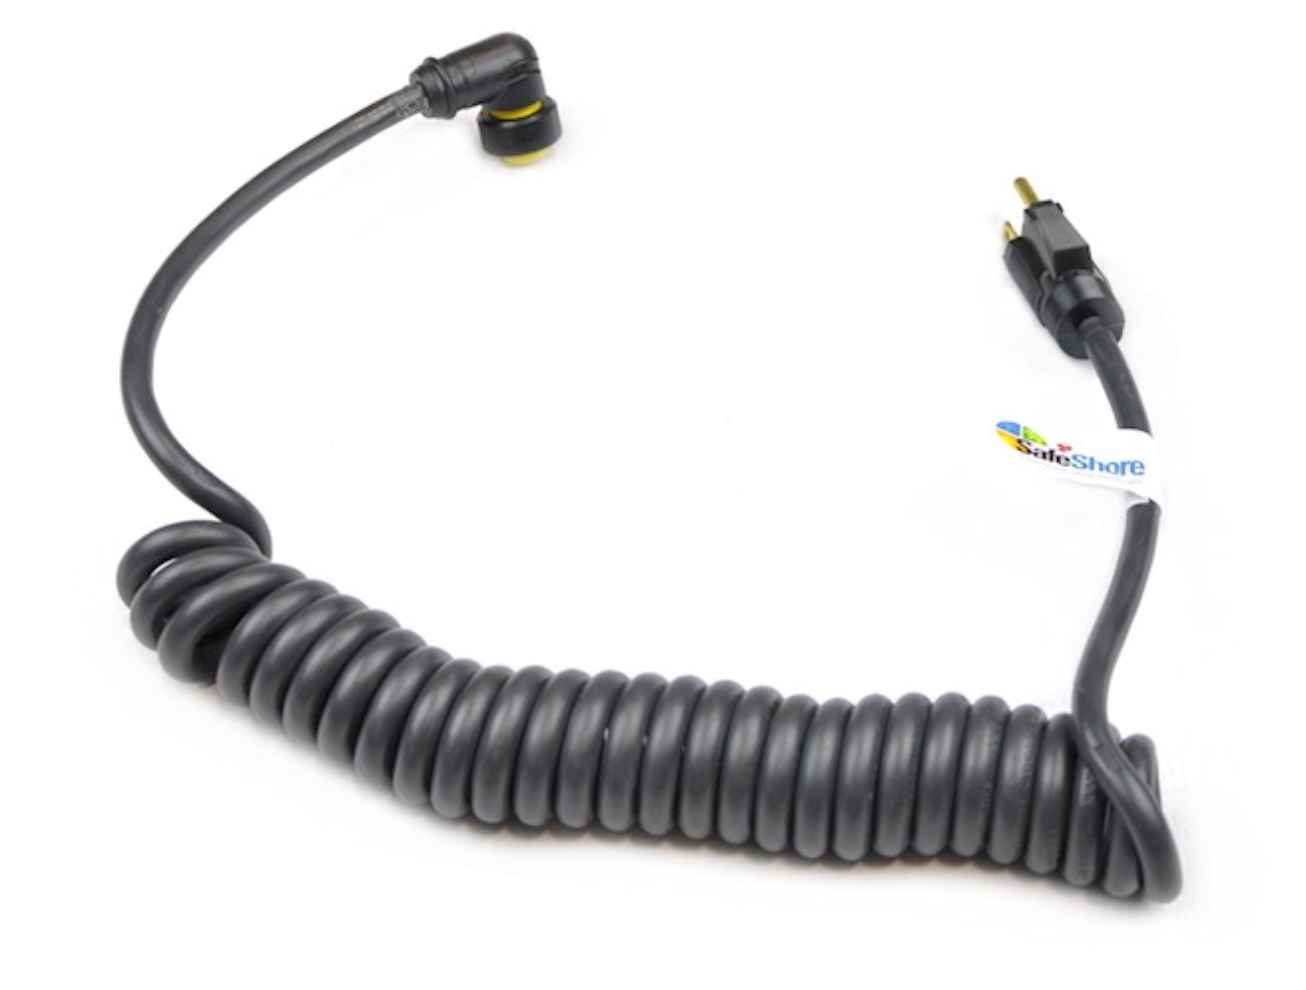 Hydrosweep replacement coiled cord